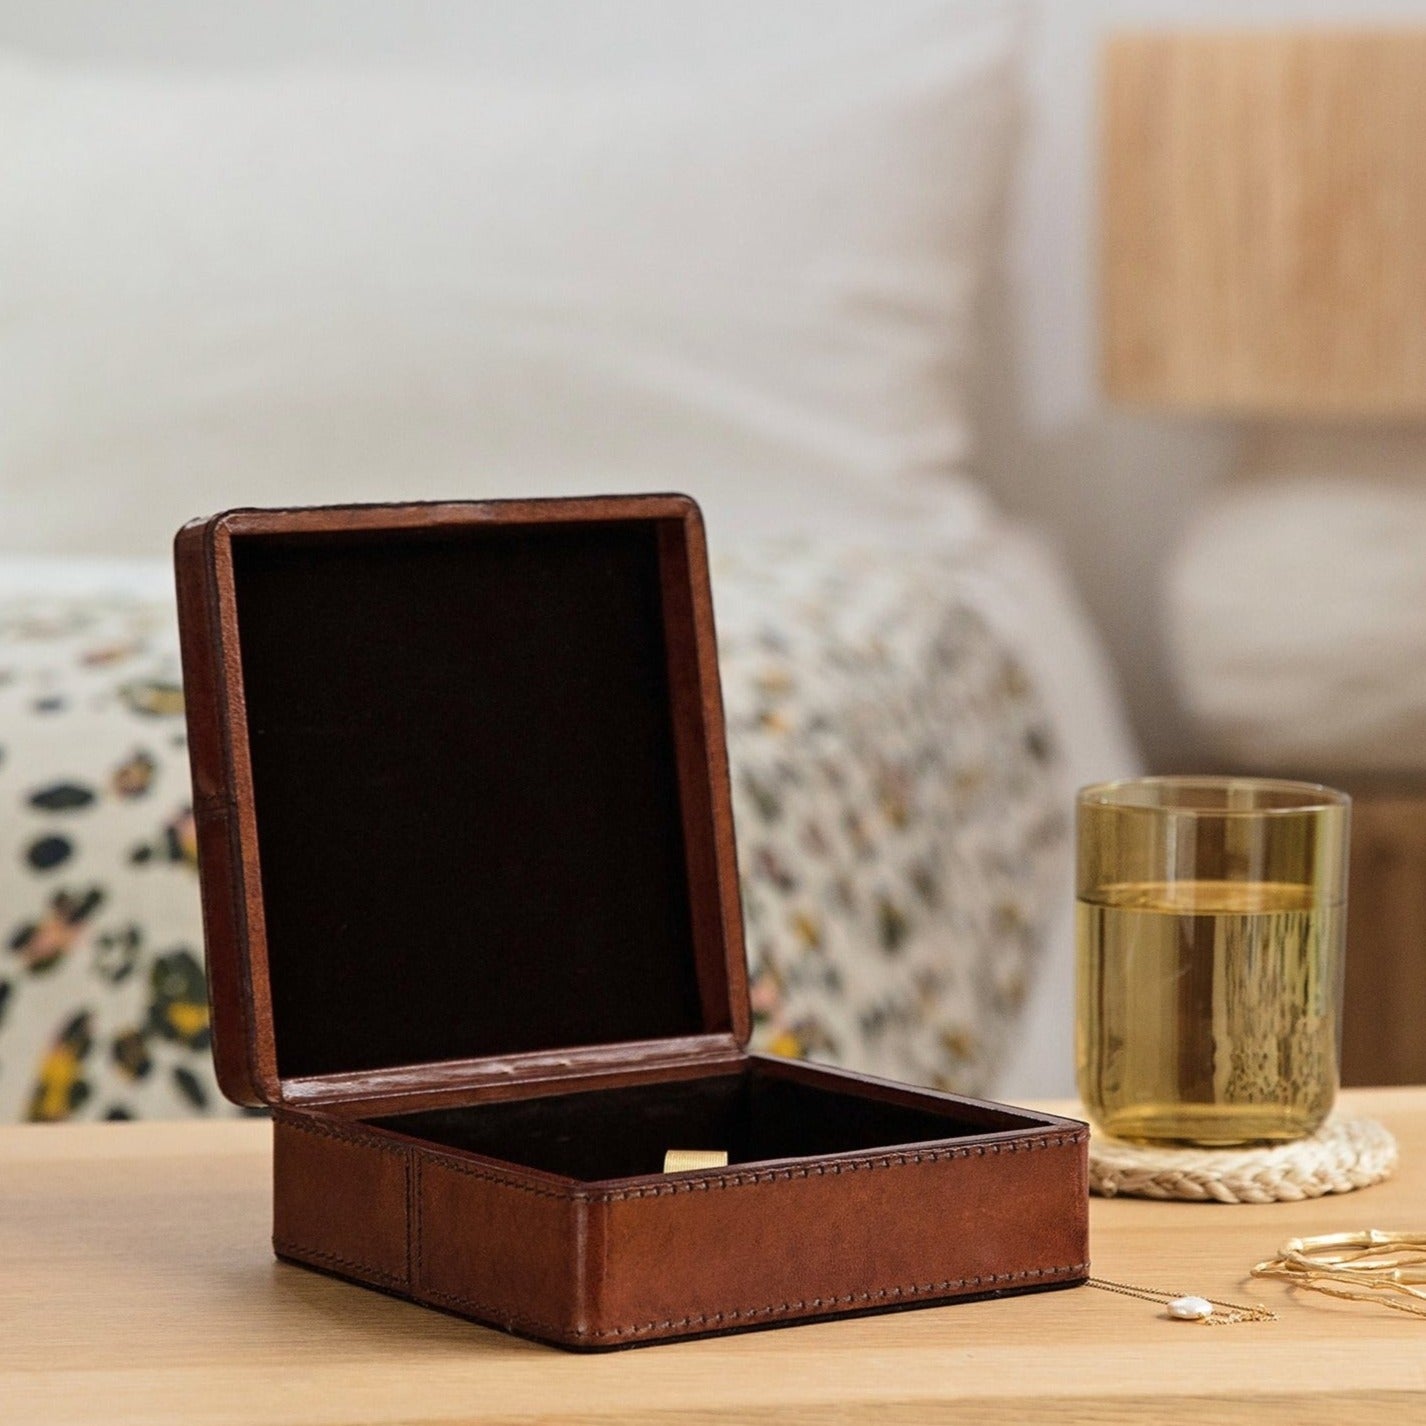 Square leather jewellery box in tan, to hold necklaces, earrings and rings. Personalise as a timeless gift for an 18th birthday or wedding anniversary.